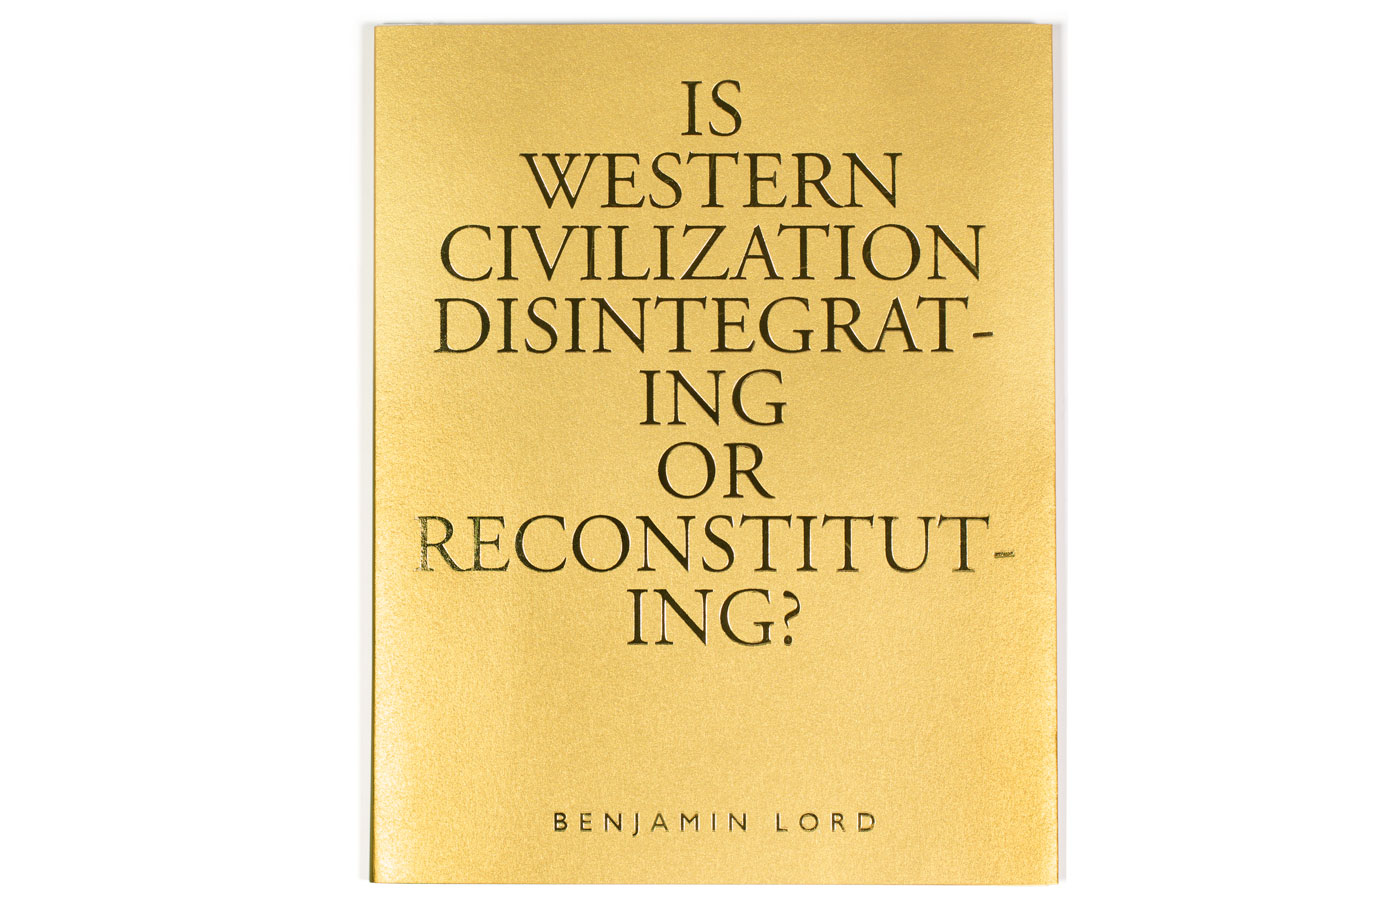 The cover of the book 'Is Western Civilization Disintegrating or Reconstituting?'